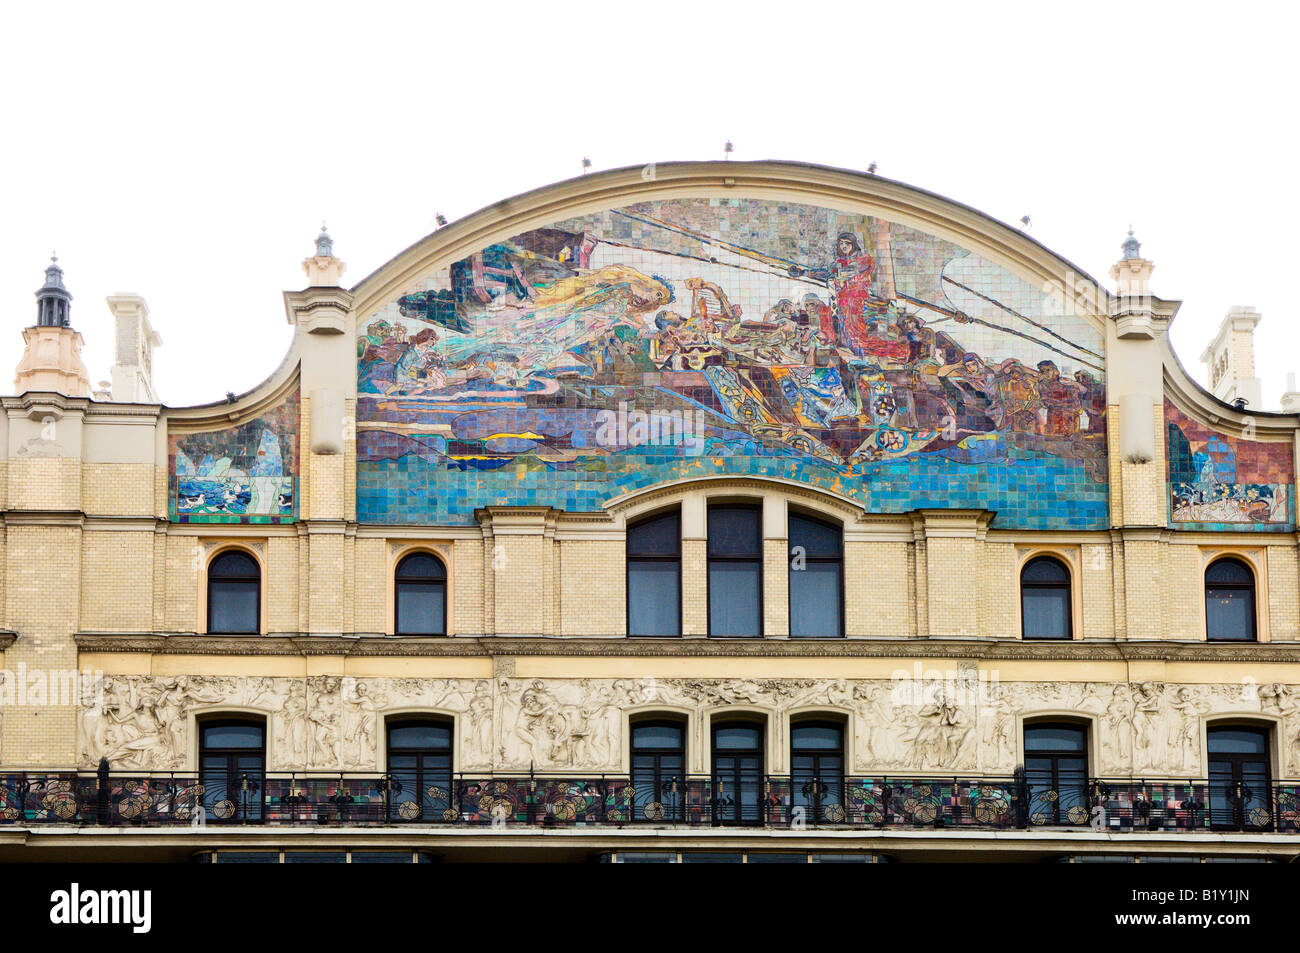 Art Nouveau mosaic decoration to the Princess of Dreams on the roof of The Hotel Metropol Revolution Square Moscow Russia Stock Photo